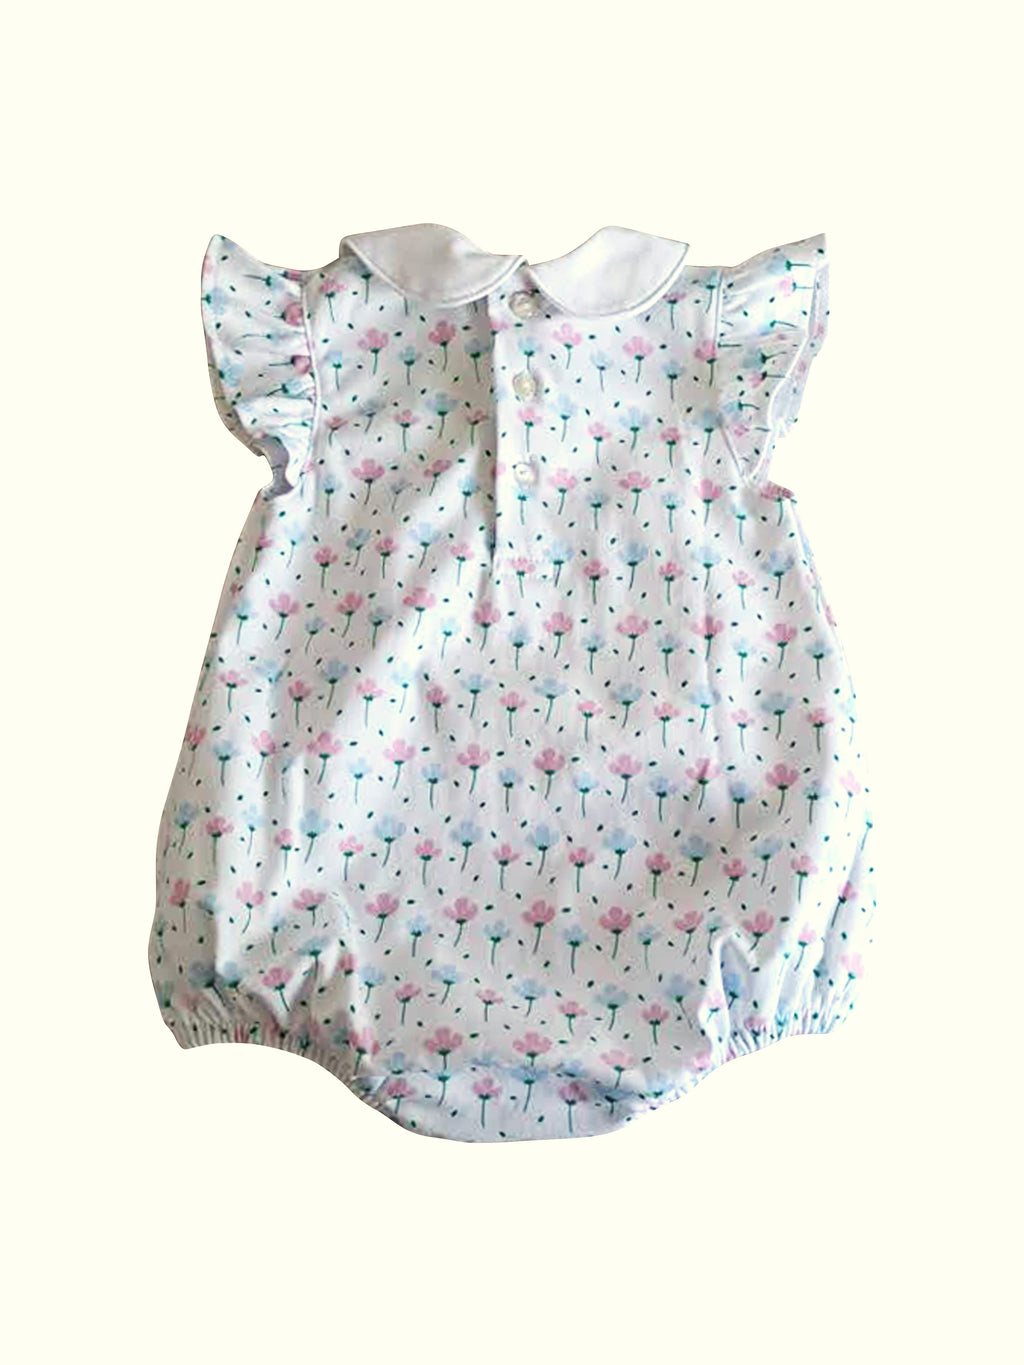 Buy Smocked Pima Cotton Baby Clothes - Little Threads Inc